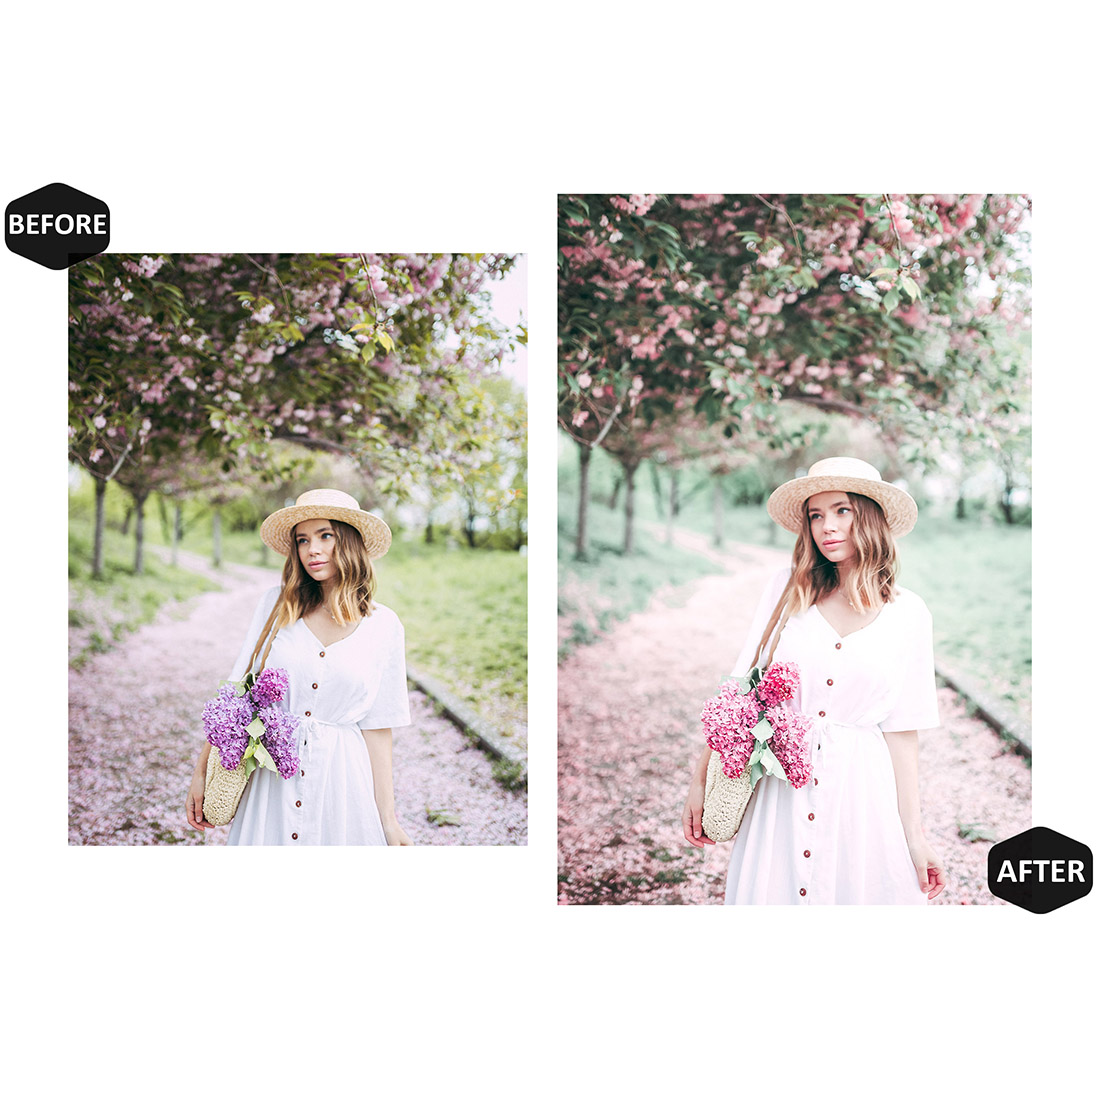 12 Photoshop Actions, Nature Glory Ps Action, Spring ACR Preset, Bright Ps Filter, Atn Portrait And Lifestyle Theme For Instagram, Blogger preview image.